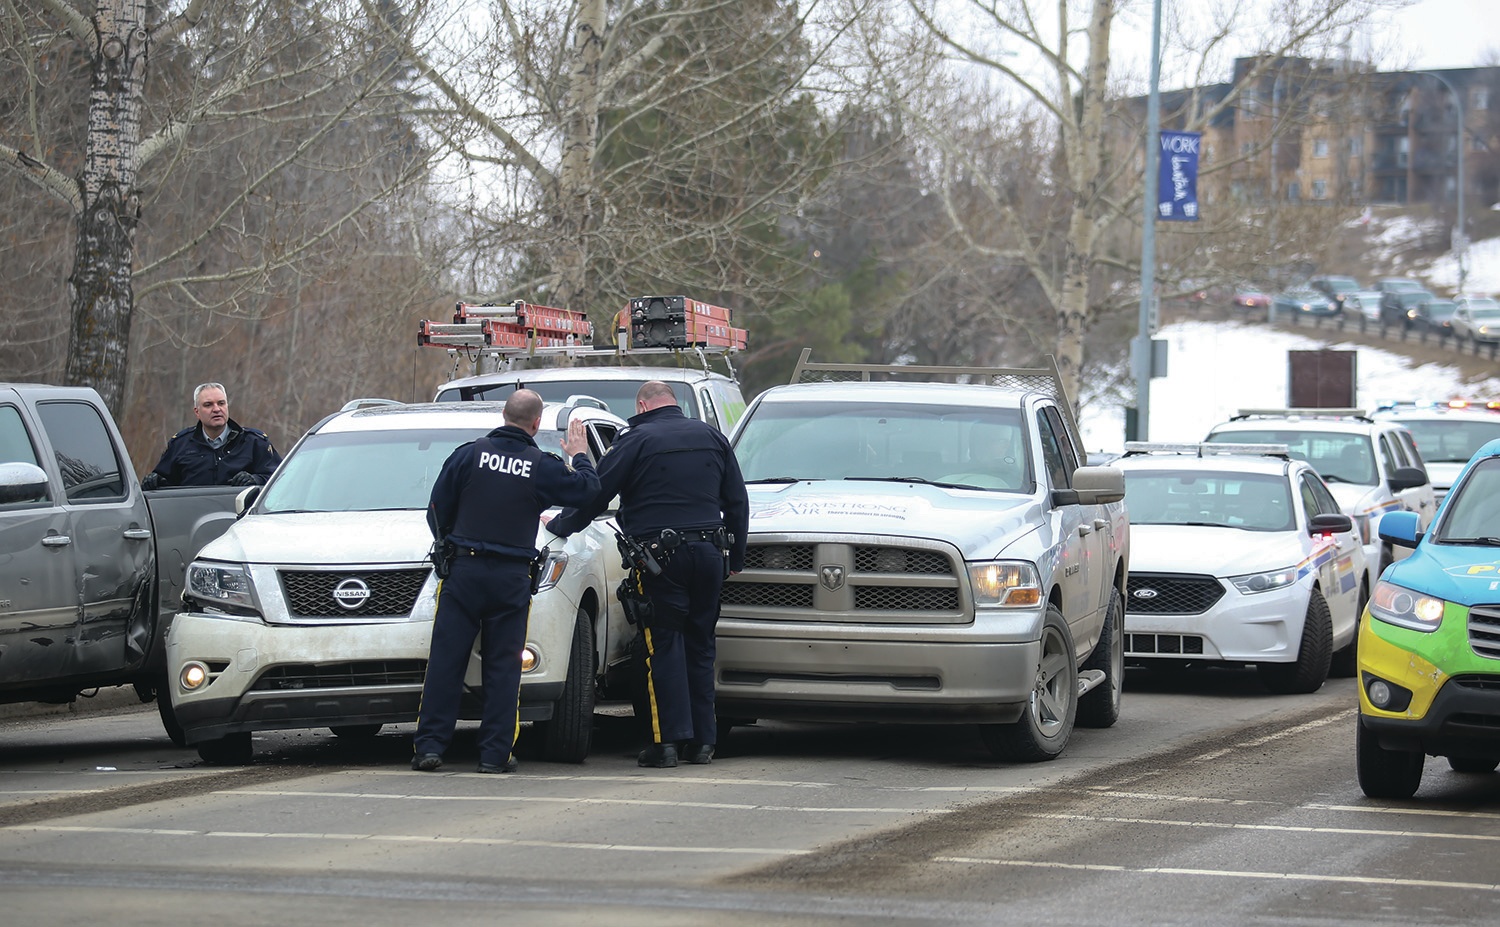 ARRESTS MADE - Three suspects were arrested this afternoon after they allegedly fled from a collision in downtown Red Deer. Police continue to search for a fourth suspect.